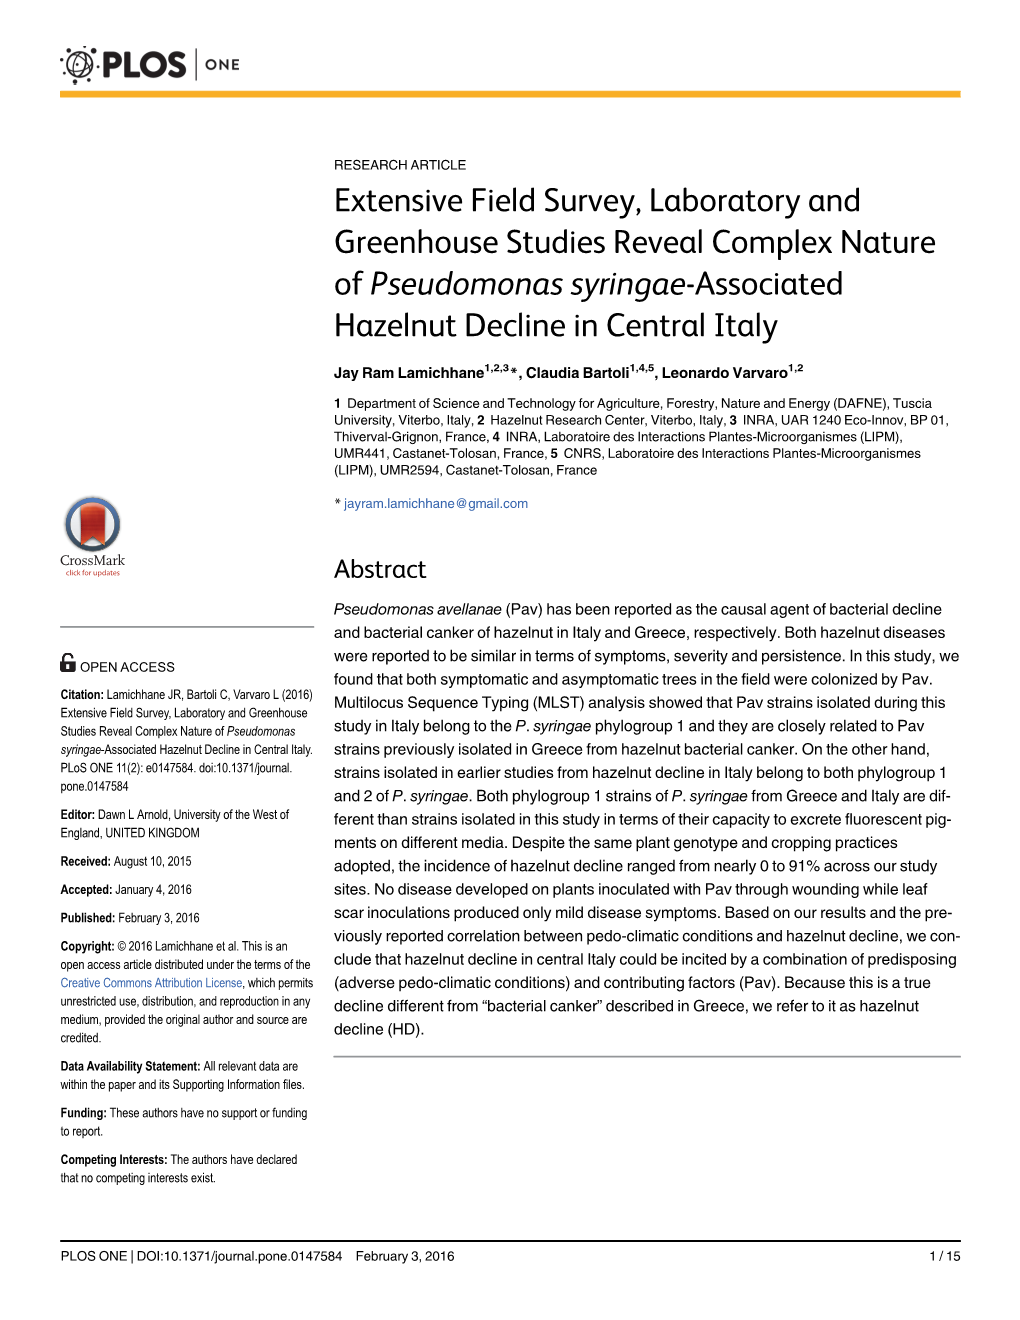 Extensive Field Survey, Laboratory and Greenhouse Studies Reveal Complex Nature of Pseudomonas Syringae-Associated Hazelnut Decline in Central Italy